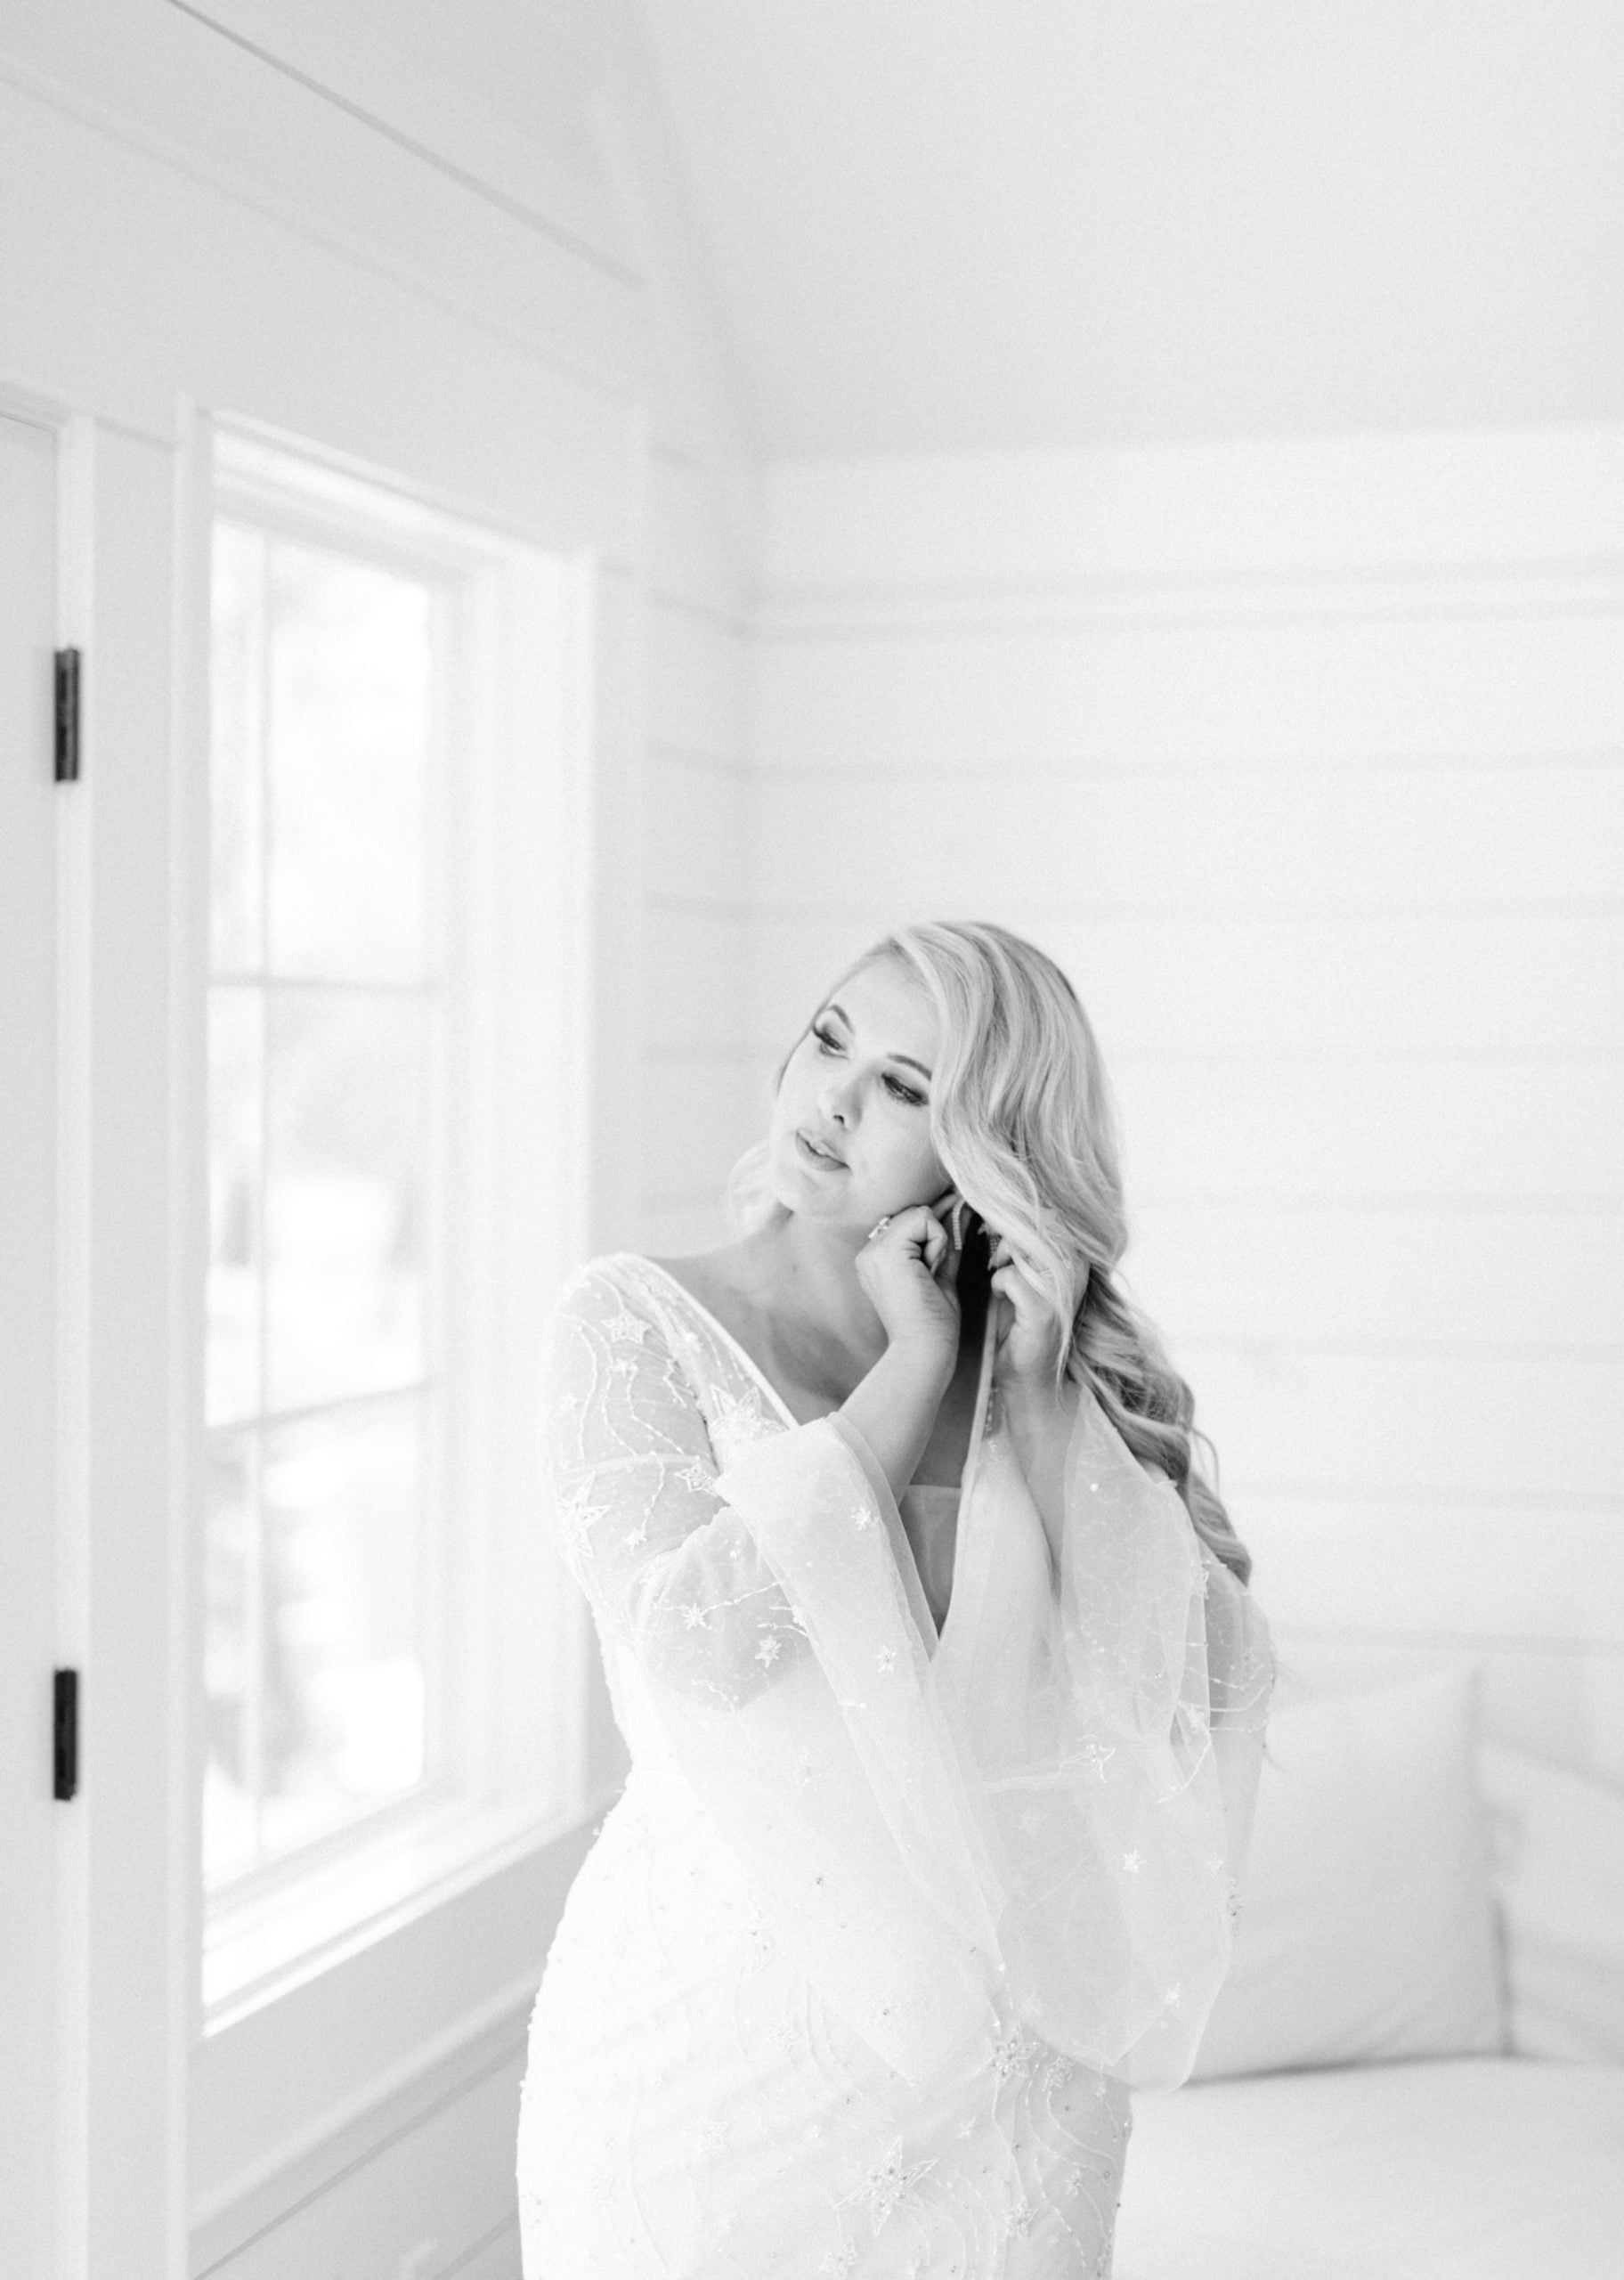 A bride getting ready on her wedding day at Oak Meadow Event Center in Alabama